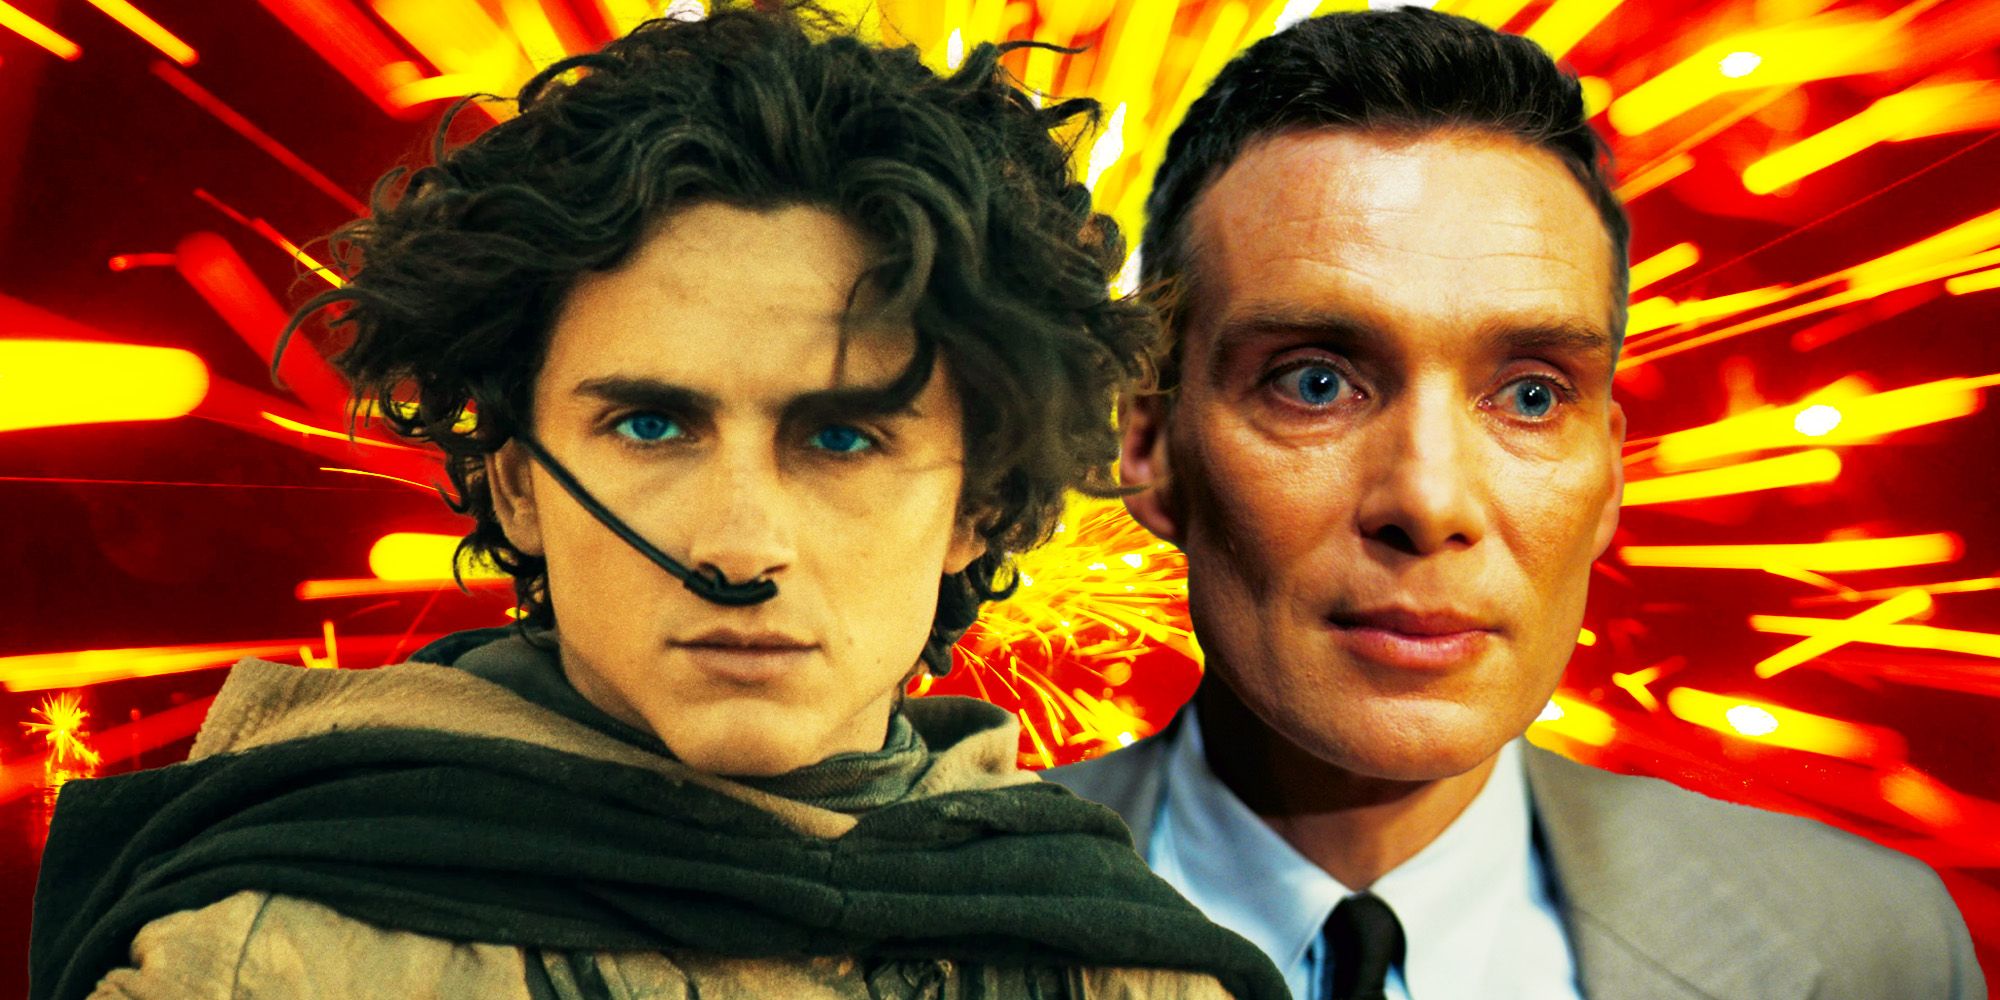 Timothée Chalamet from Dune Part Two and Cillian Murphy from Oppenheimer